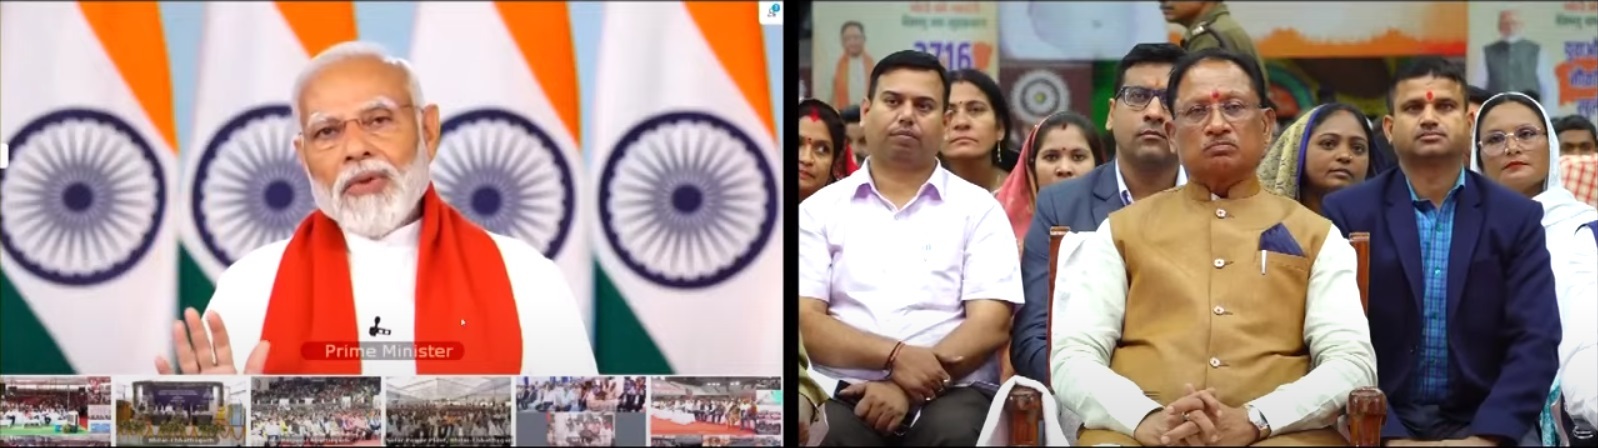 Developed India, Developed CG: Chhattisgarh is ready to welcome the Prime Minister in the Developed India, Developed Chhattisgarh program…watch LIVE